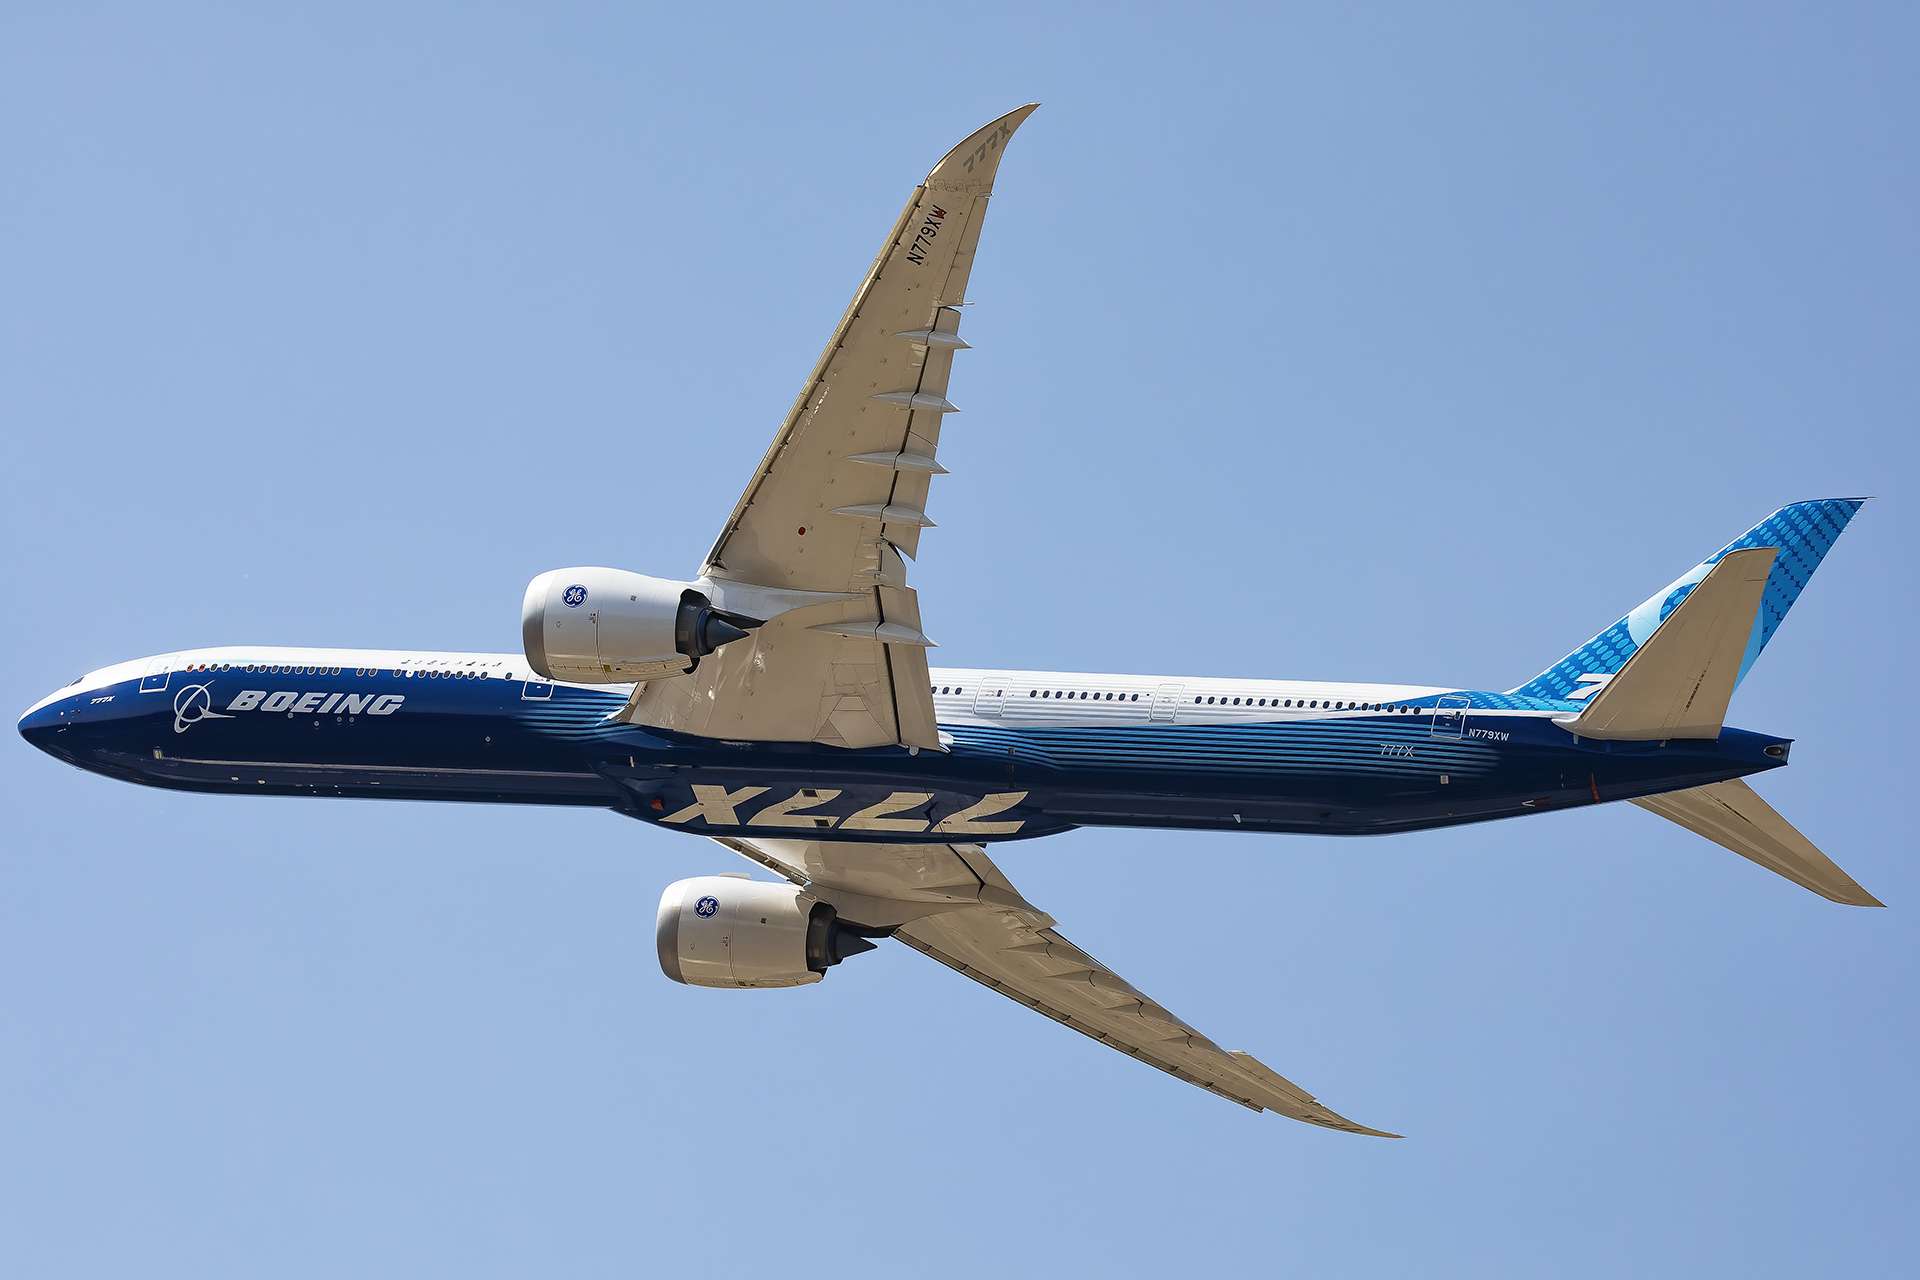 From Financials to Production Rates, Boeing is On The Up